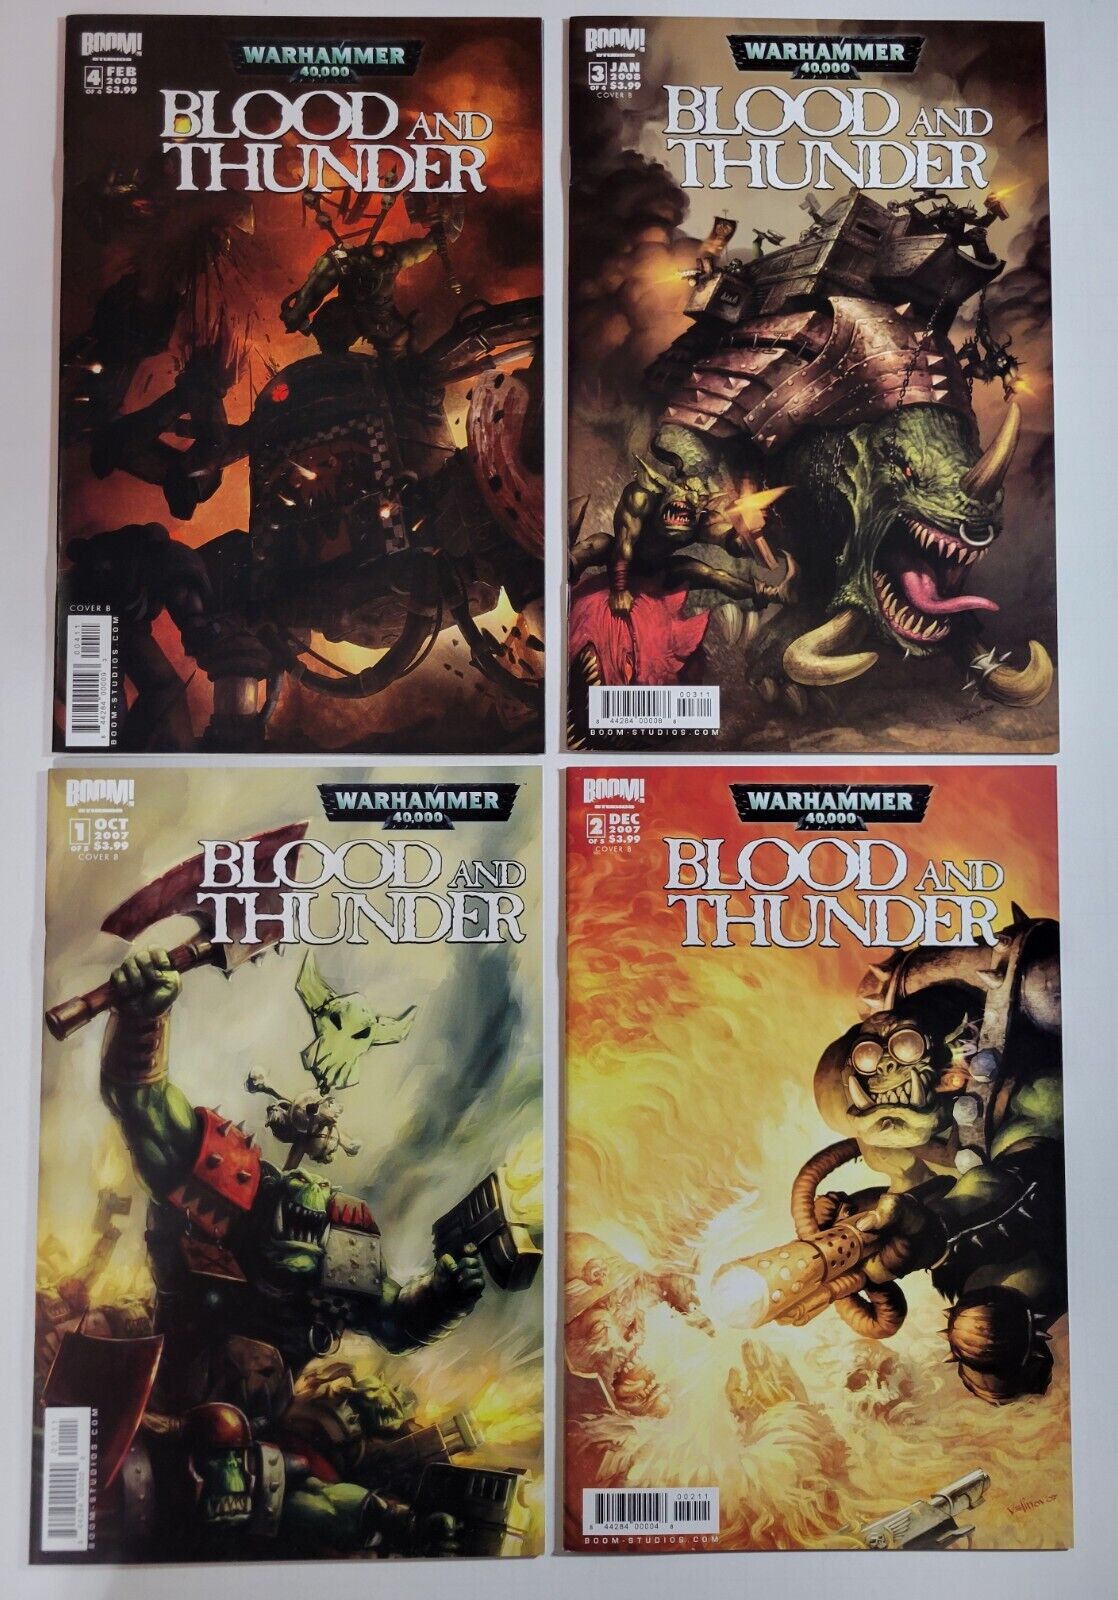 Warhammer 40k Blood and Thunder #1 #2 #3 #4 Complete Cover B Set Boom Studios